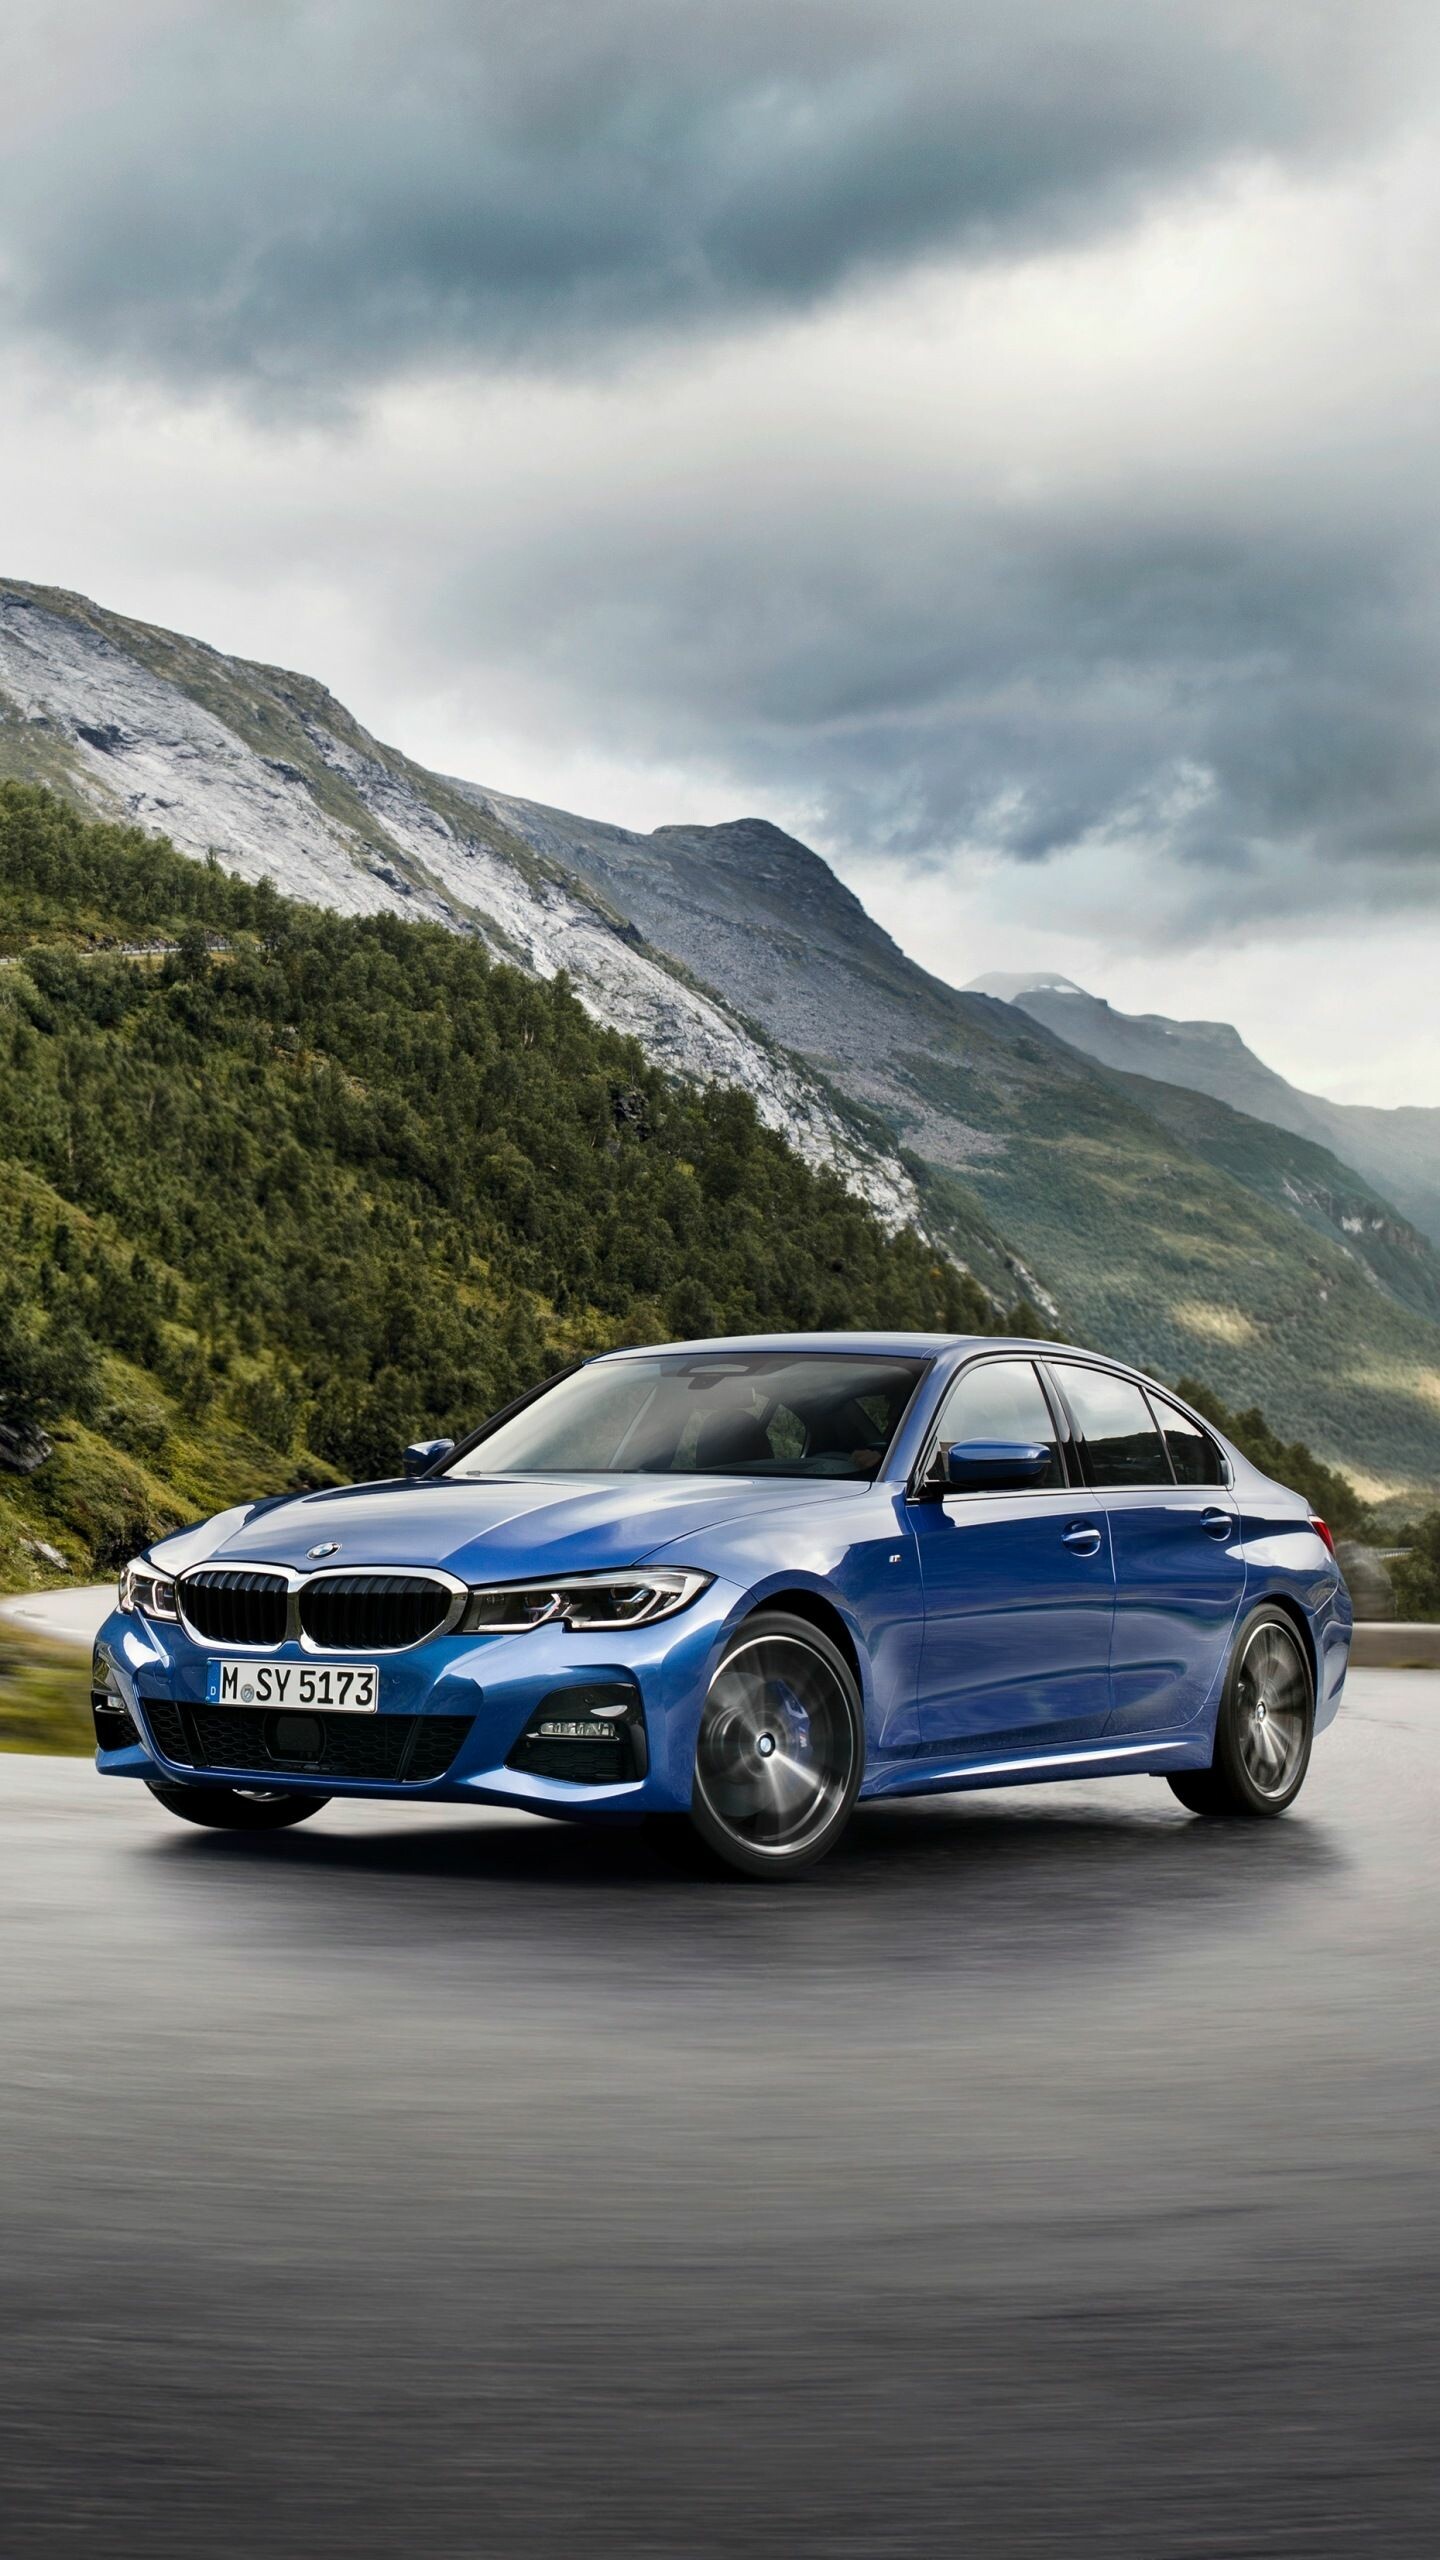 BMW 2 Series: The part of the “German Big 3” luxury automakers, Sedan. 1440x2560 HD Background.